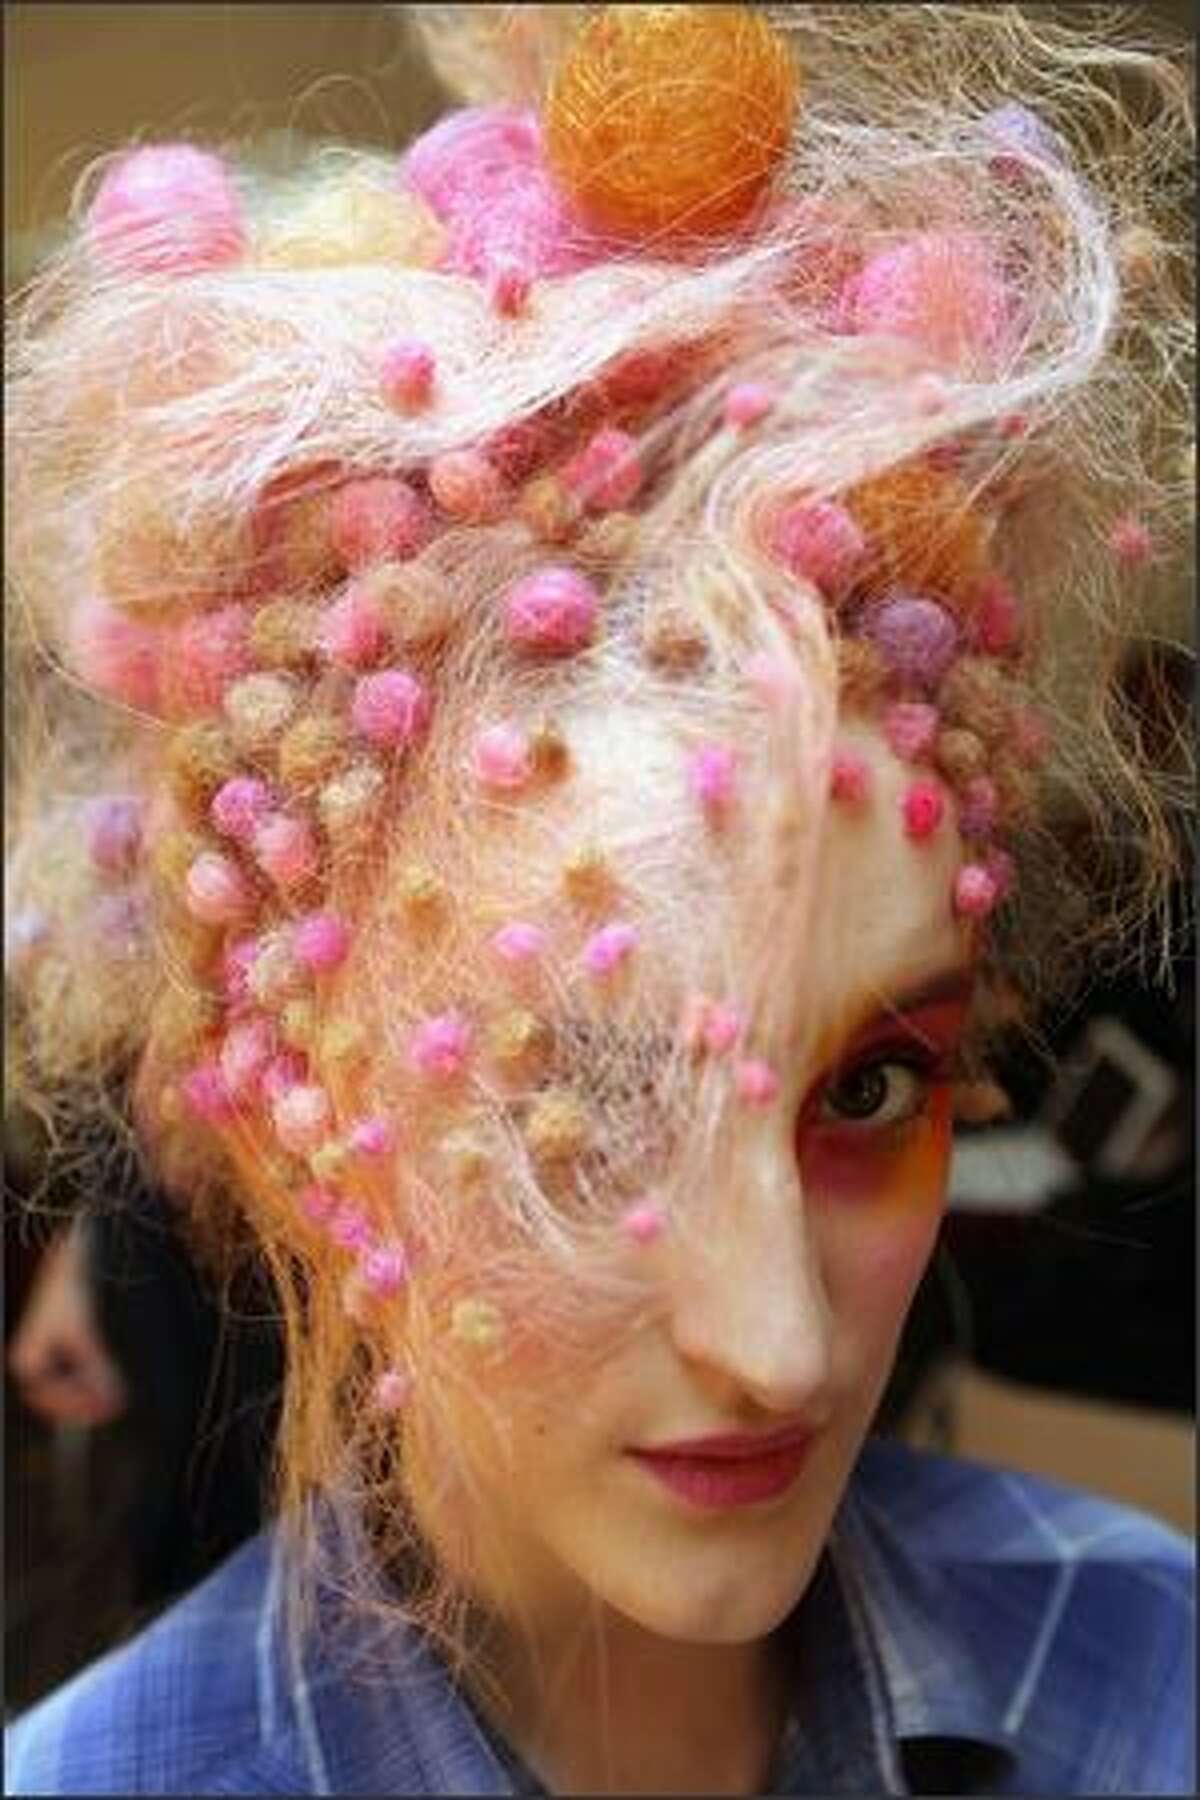 Models prepare in the dressing rooms before taking part in a catwalk show as part of the L'Oreal Colour Trophy Final '09 at Earls Court in London, England.